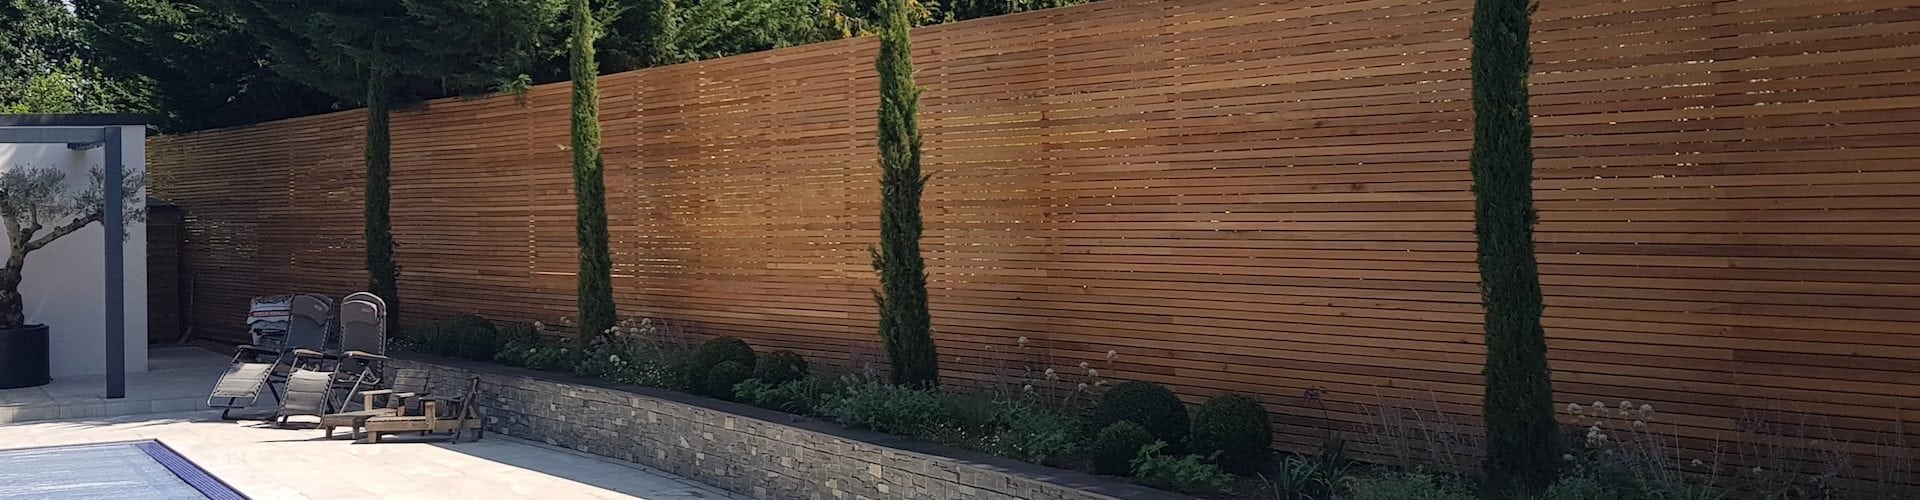 Compliment your home by upgrading your Fence